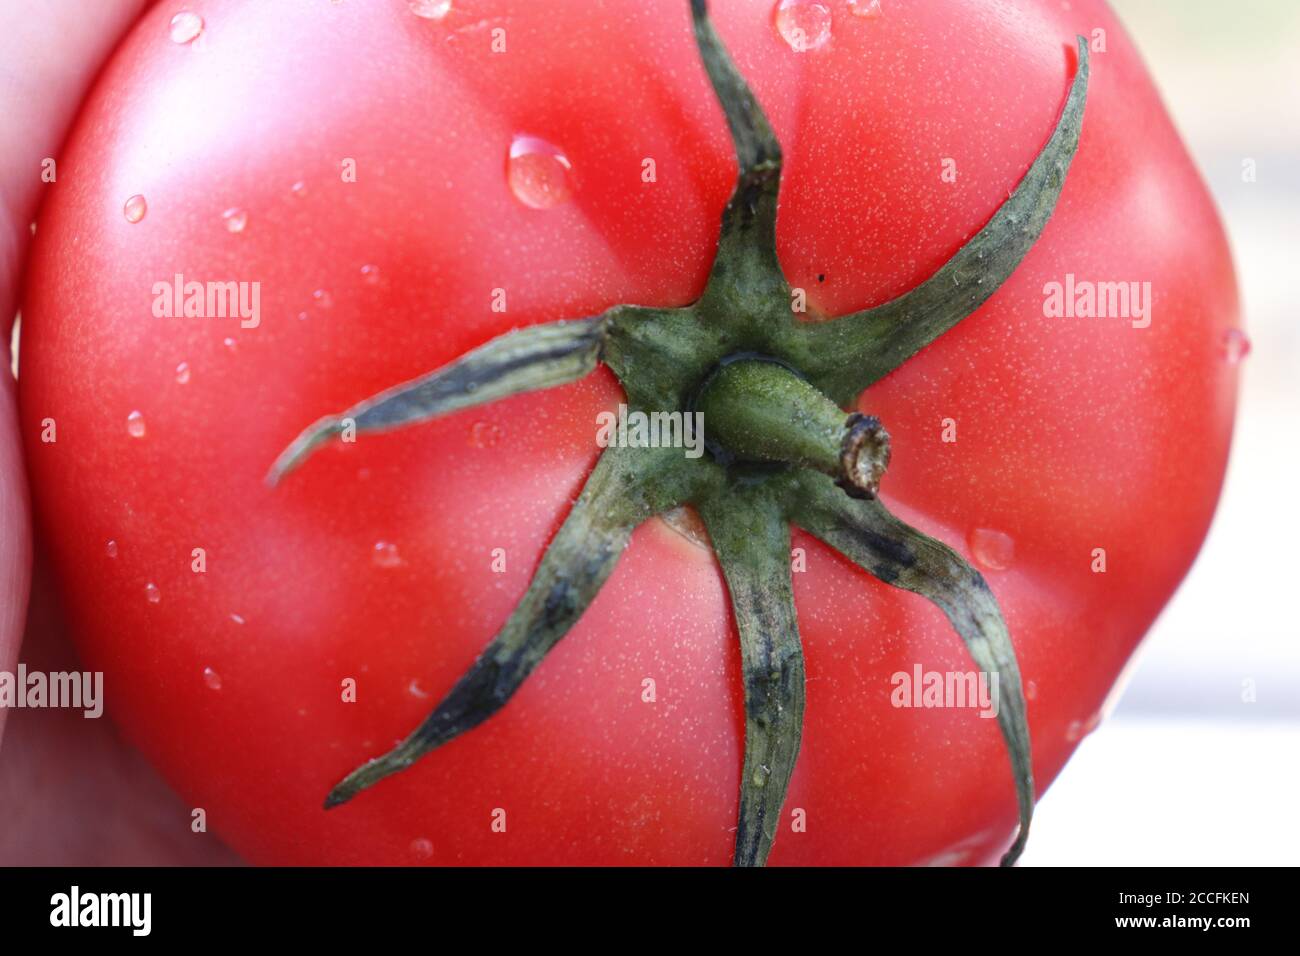 Macro shot of a red healthy ripe tomato sprayed with water lat. Solanum lycopersicum Stock Photo